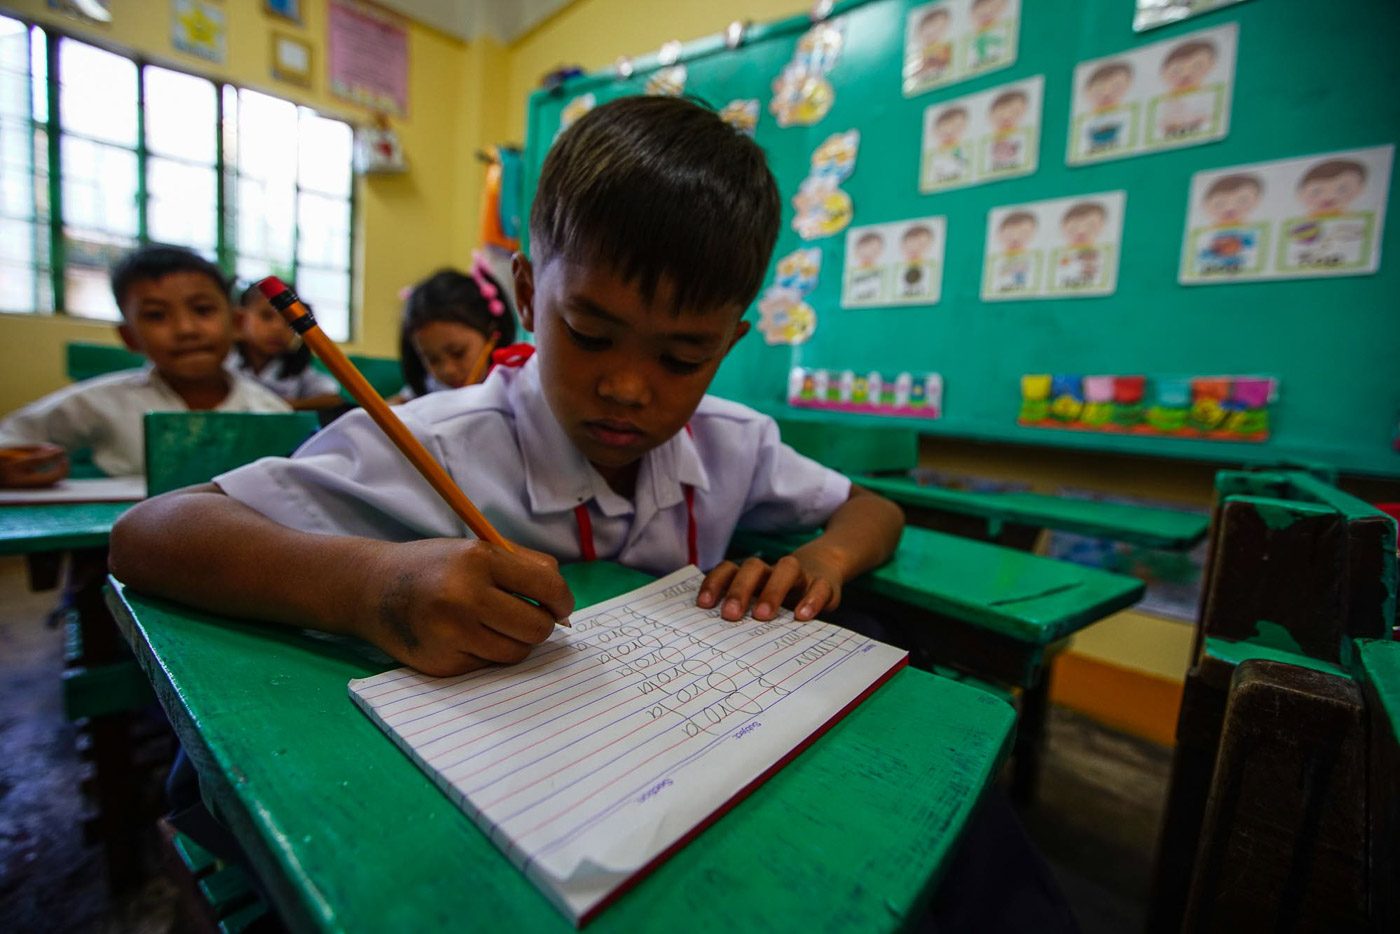 No one left out: Schools required to provide neutral desks for students